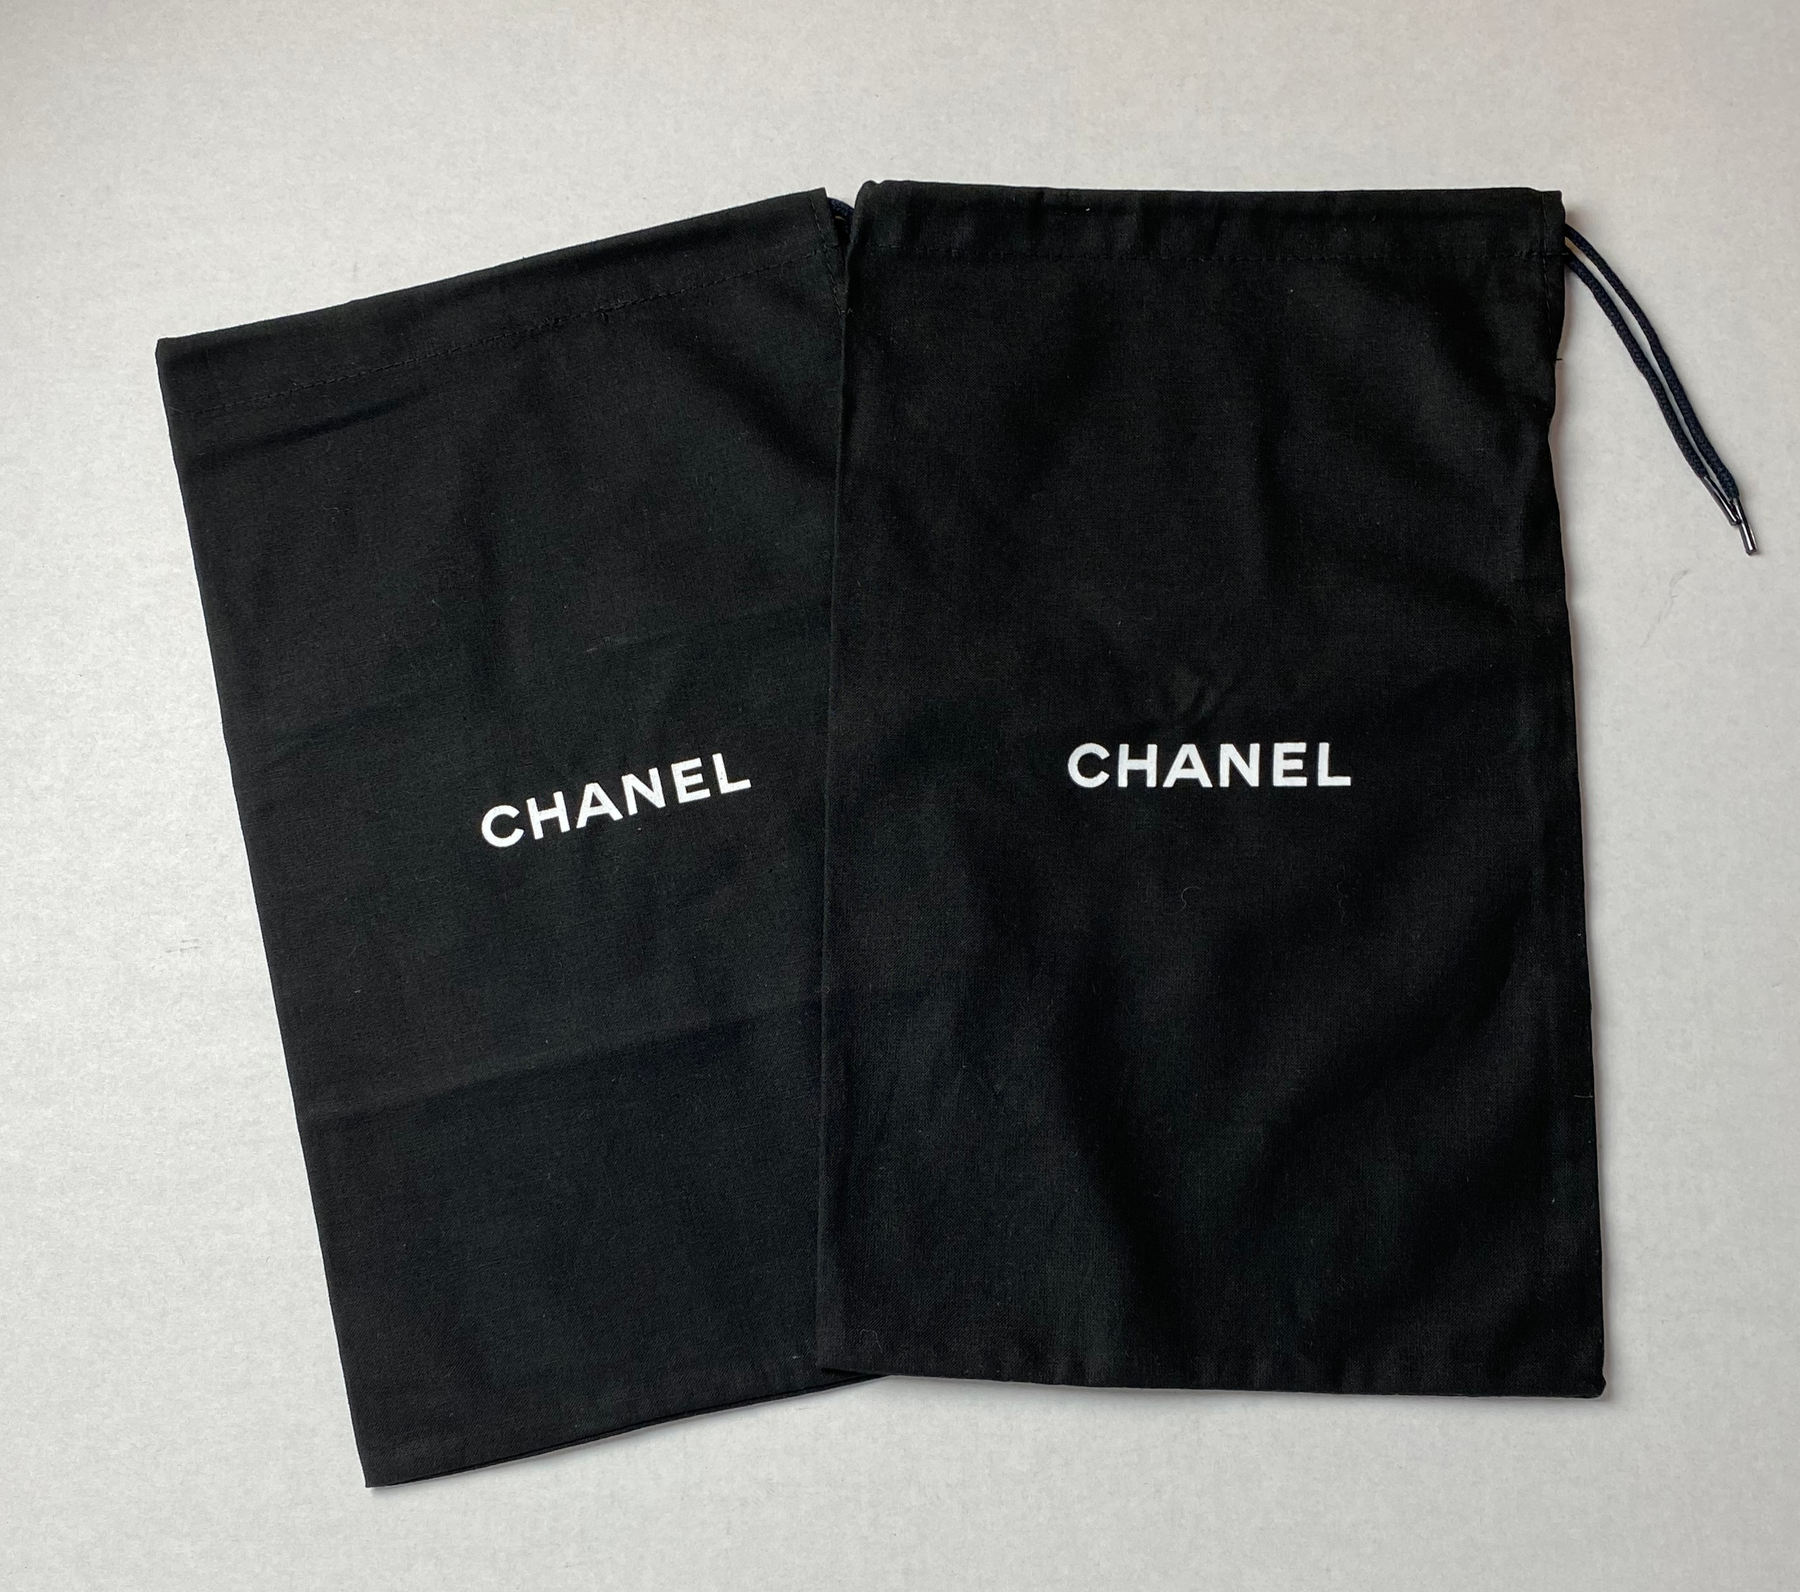 100% Auth Chanel Set of Two Black Shoe/ Small Bag/ Wallet Dust Bags 12.75x  7.75